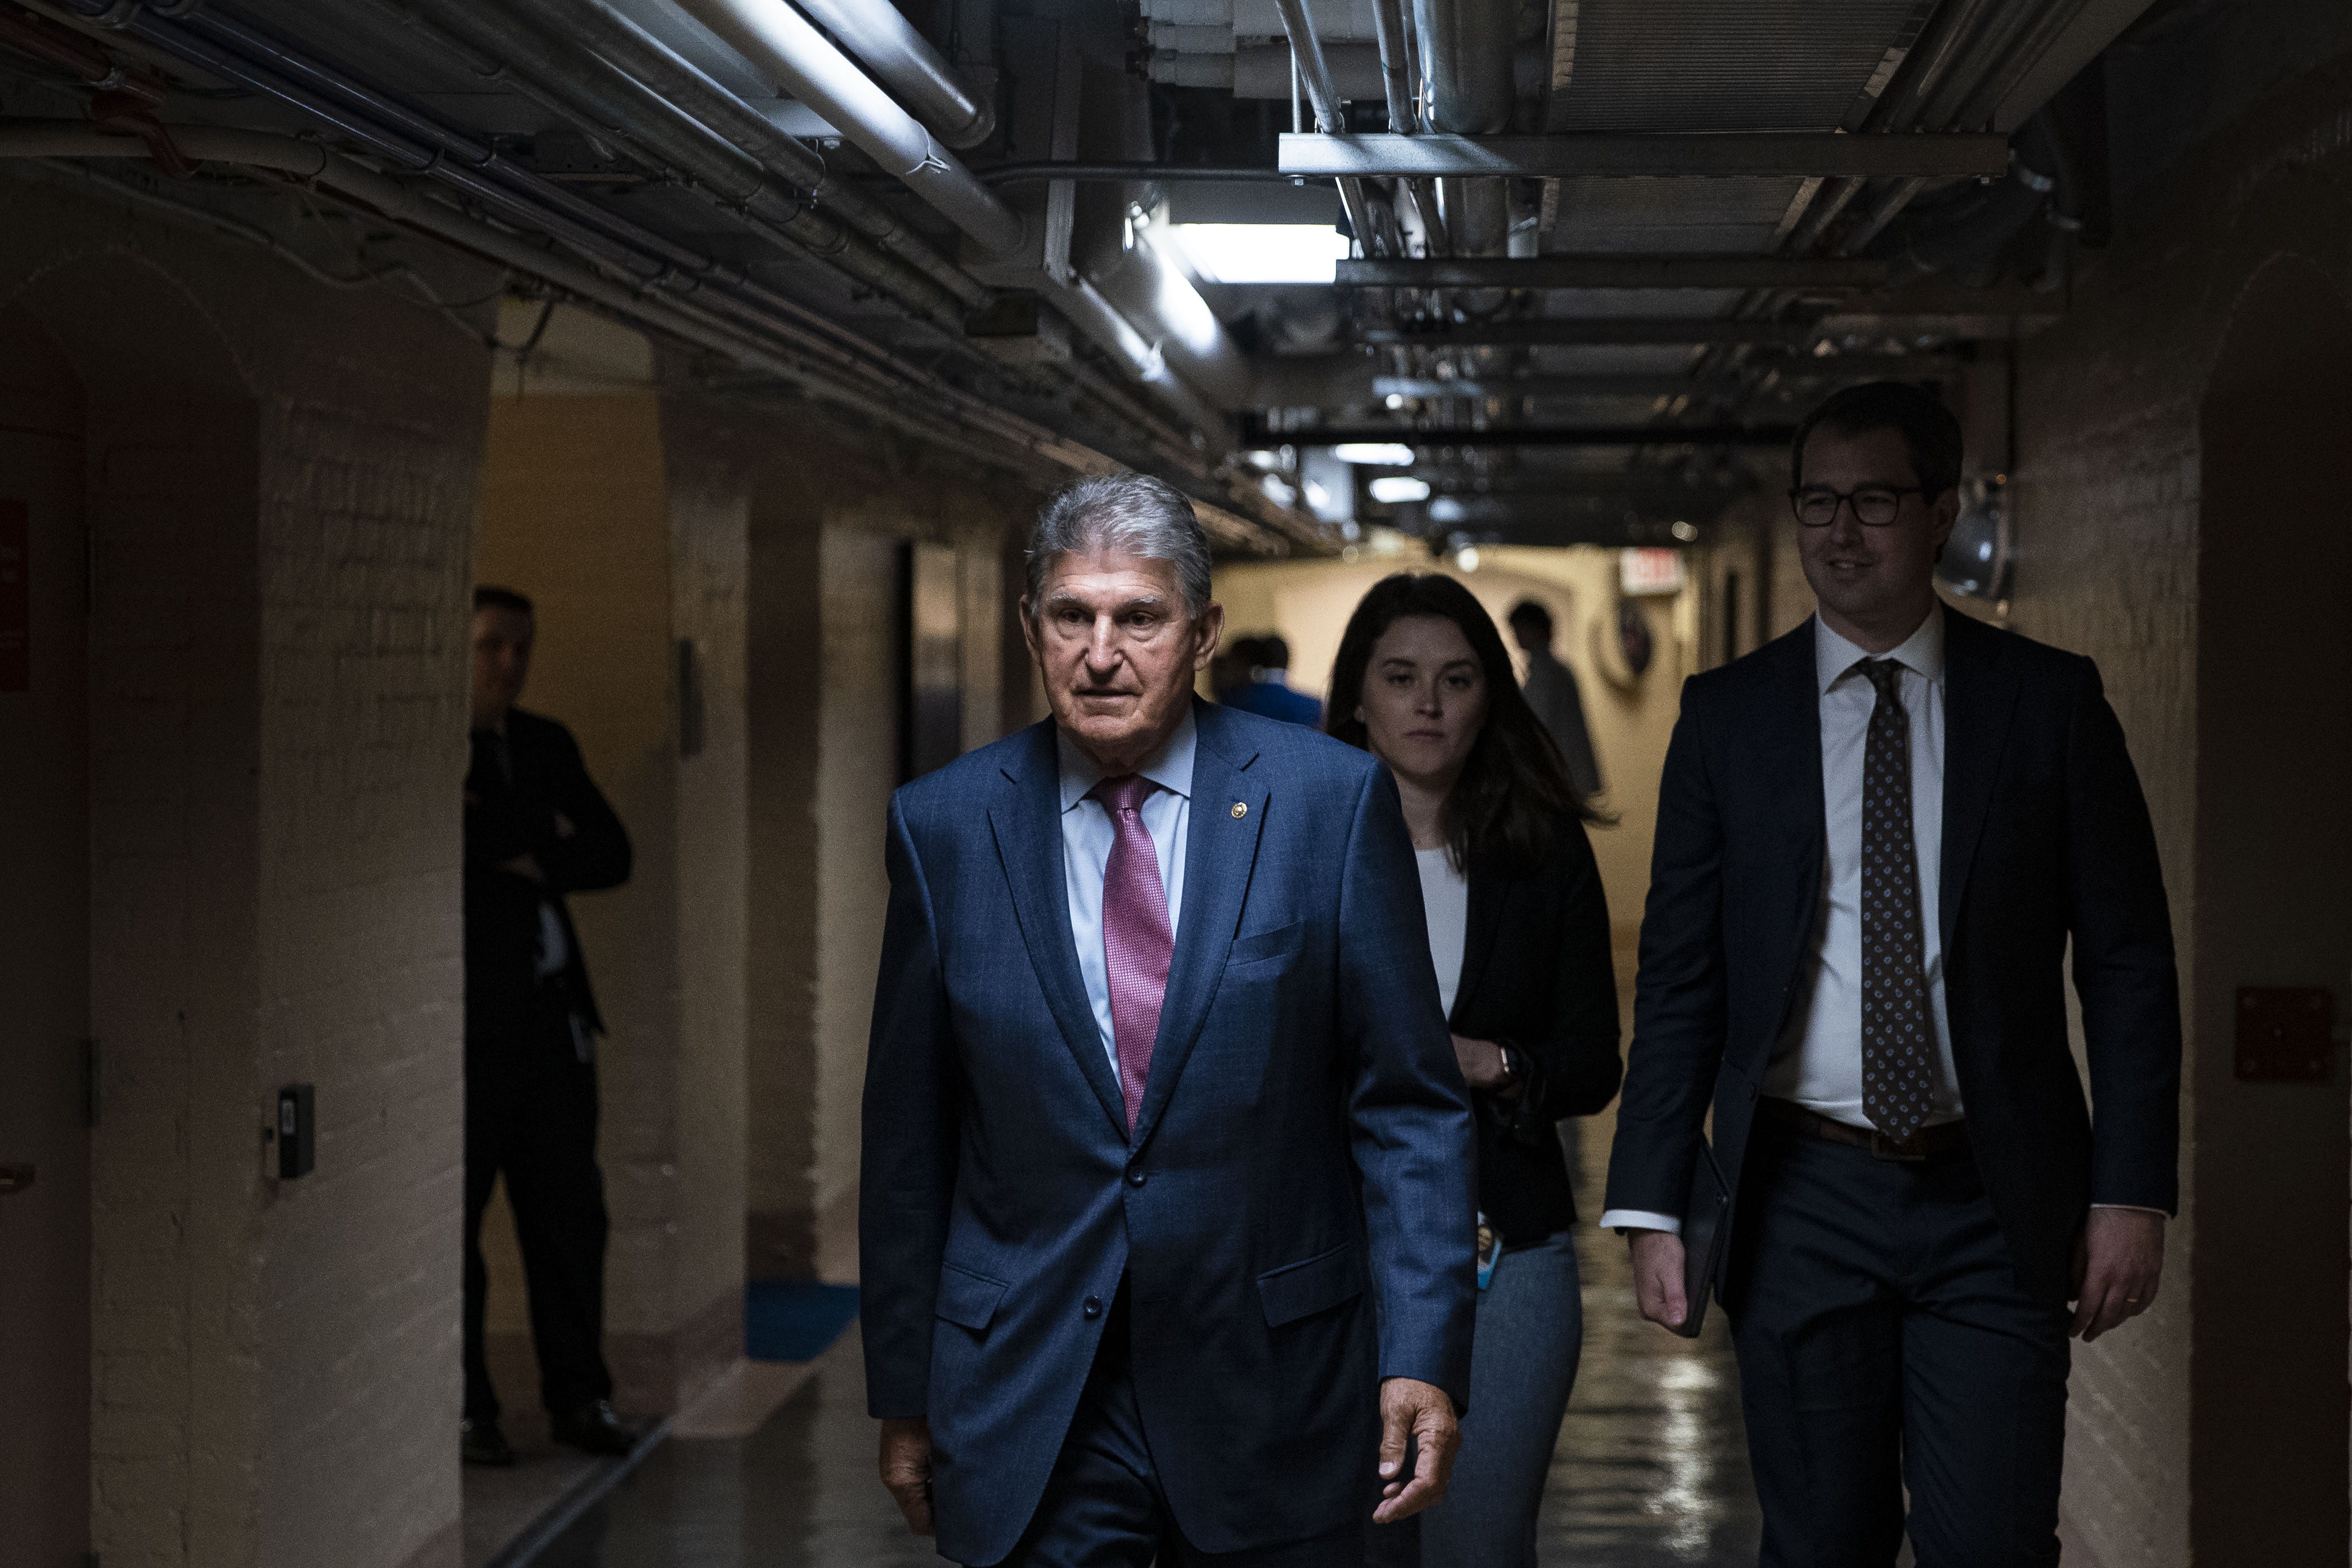 Senator Joe Manchin&nbsp;arrives for a meeting with Texas Democrats at his hideaway office in the basement of the U.S. Capitol in Washington, D.C., on&nbsp;July 15.&nbsp;